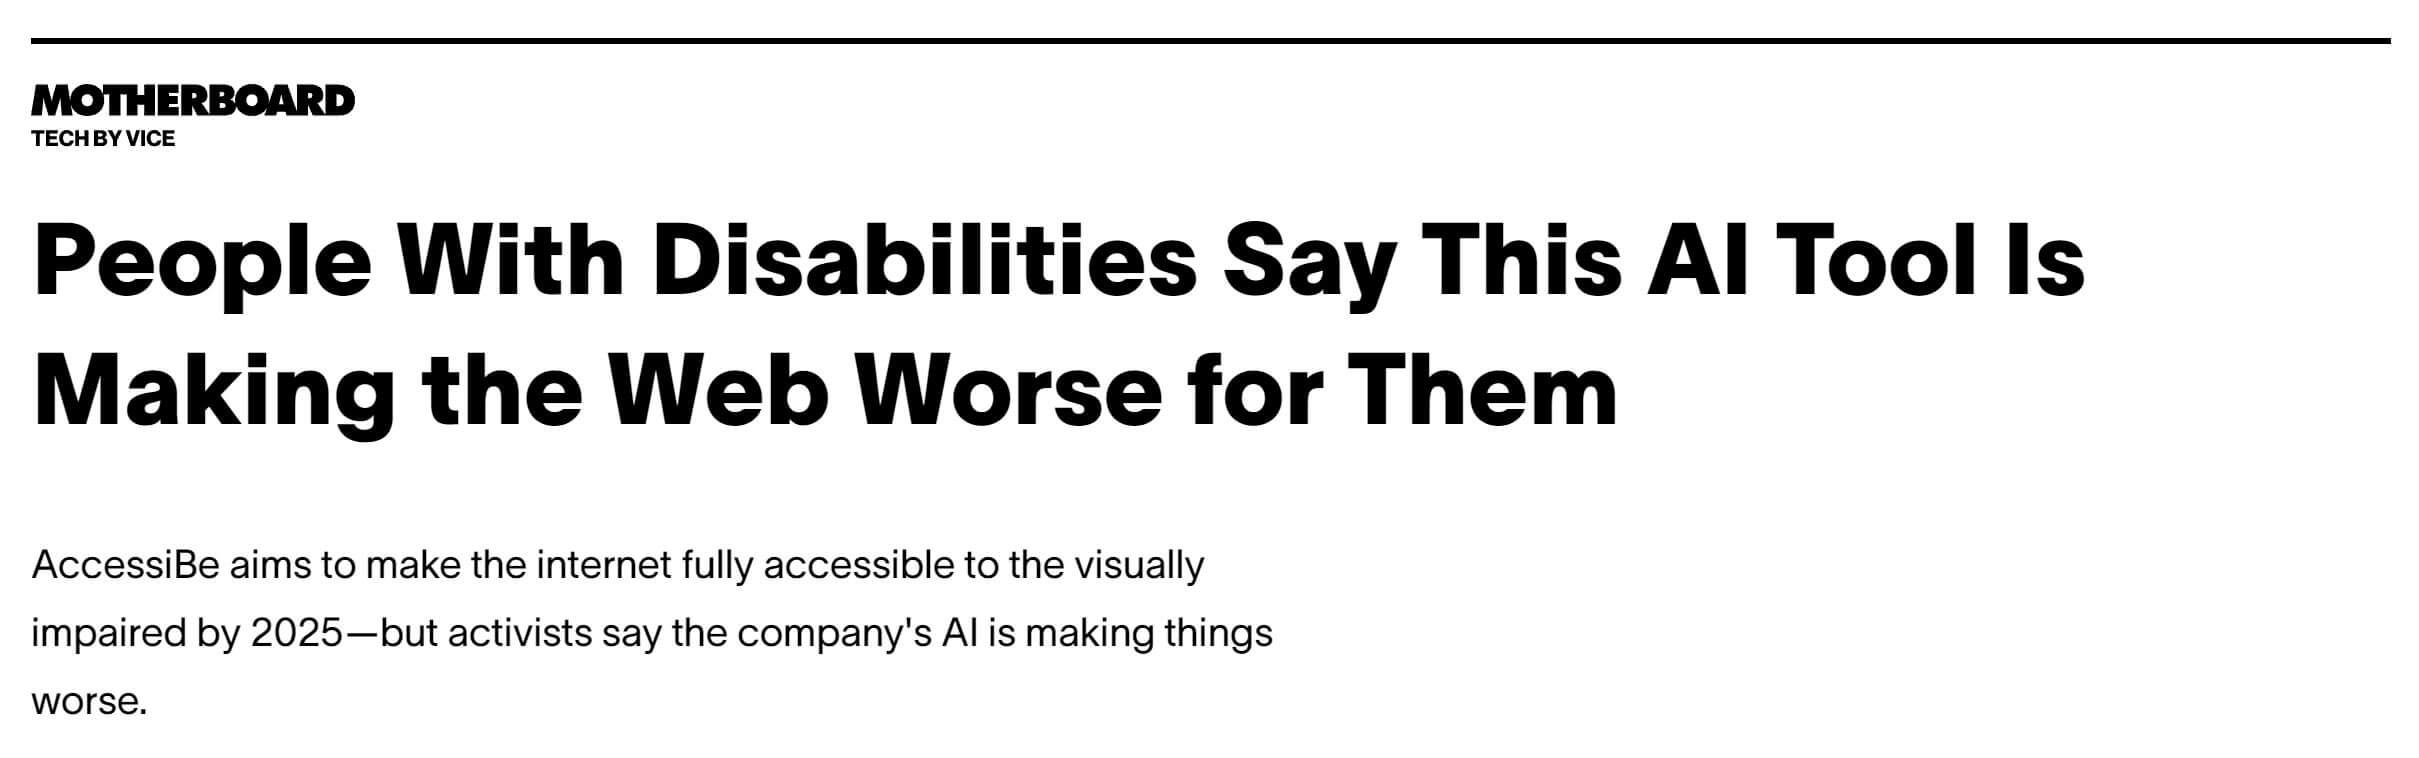 Vice, Motherboard headline: People With Disabilities Say This AI Tool Is Making the Web Worse for Them AccessiBe aims to make the internet fully accessible to the visually impaired by 2025—but activists say the company's AI is making things worse.